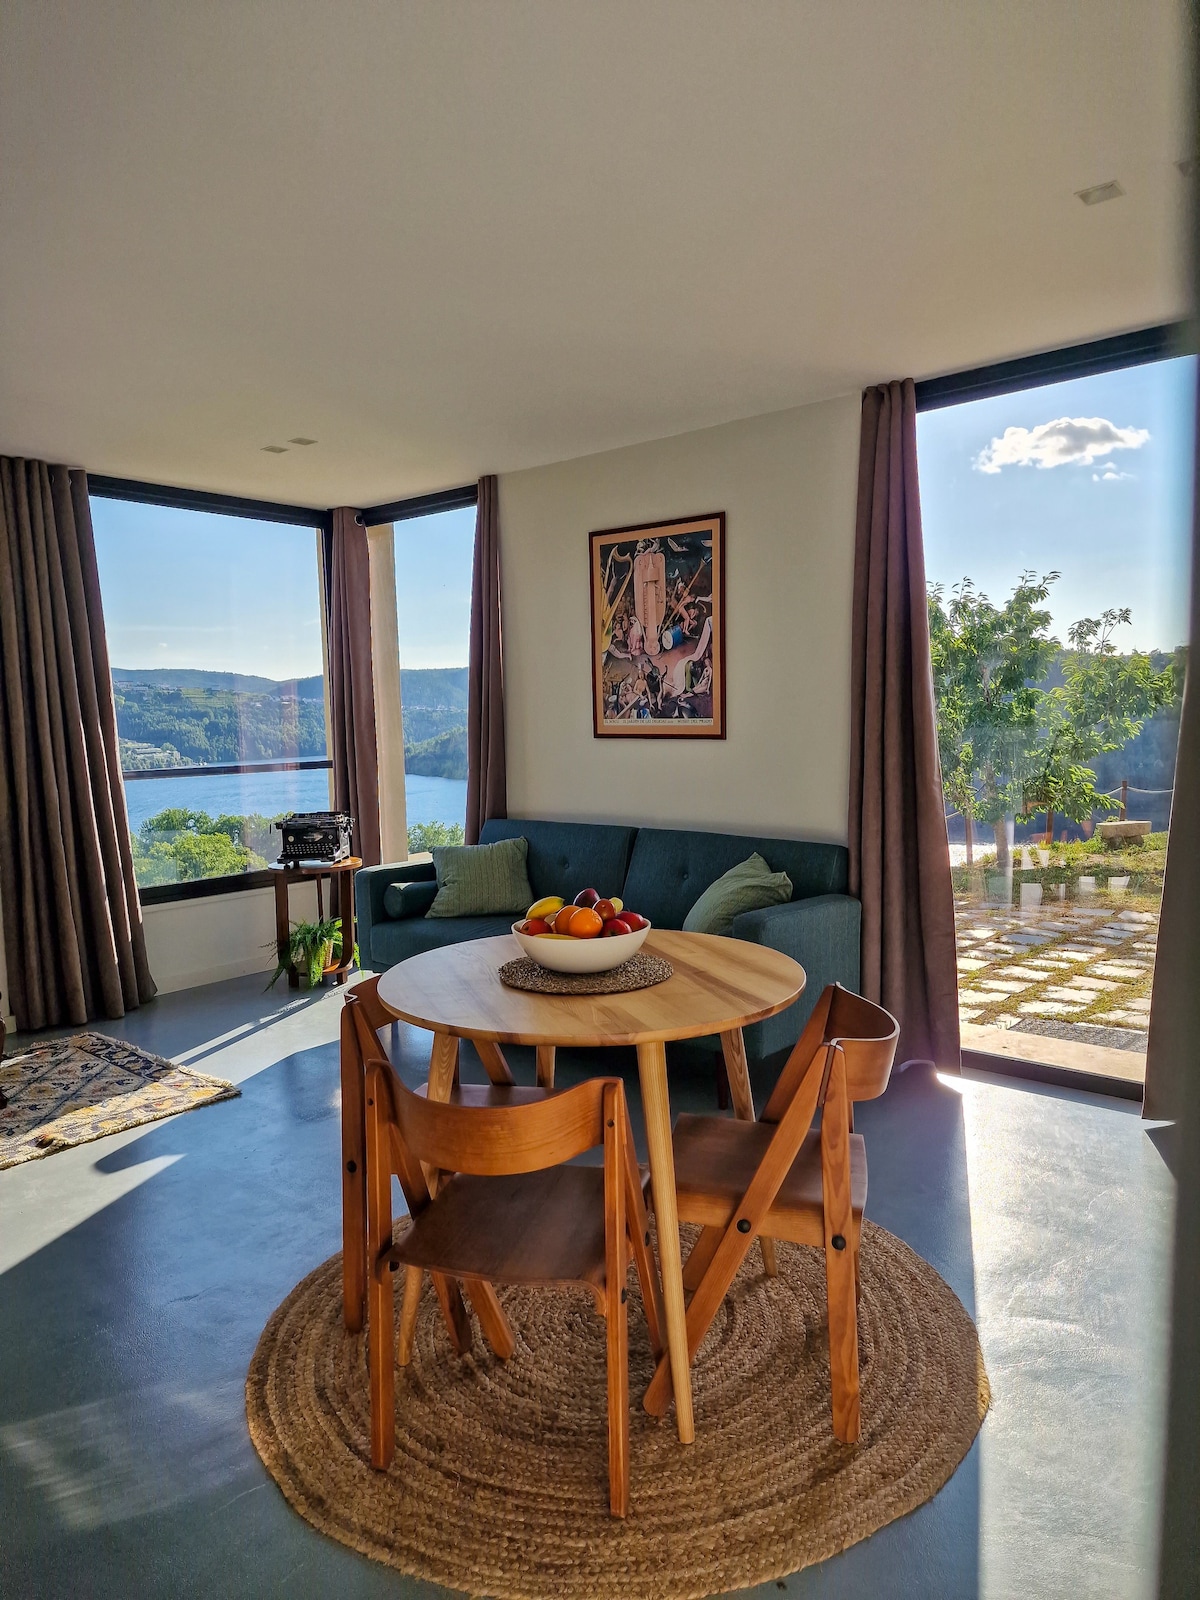 Writer's retreat by the Douro Valley